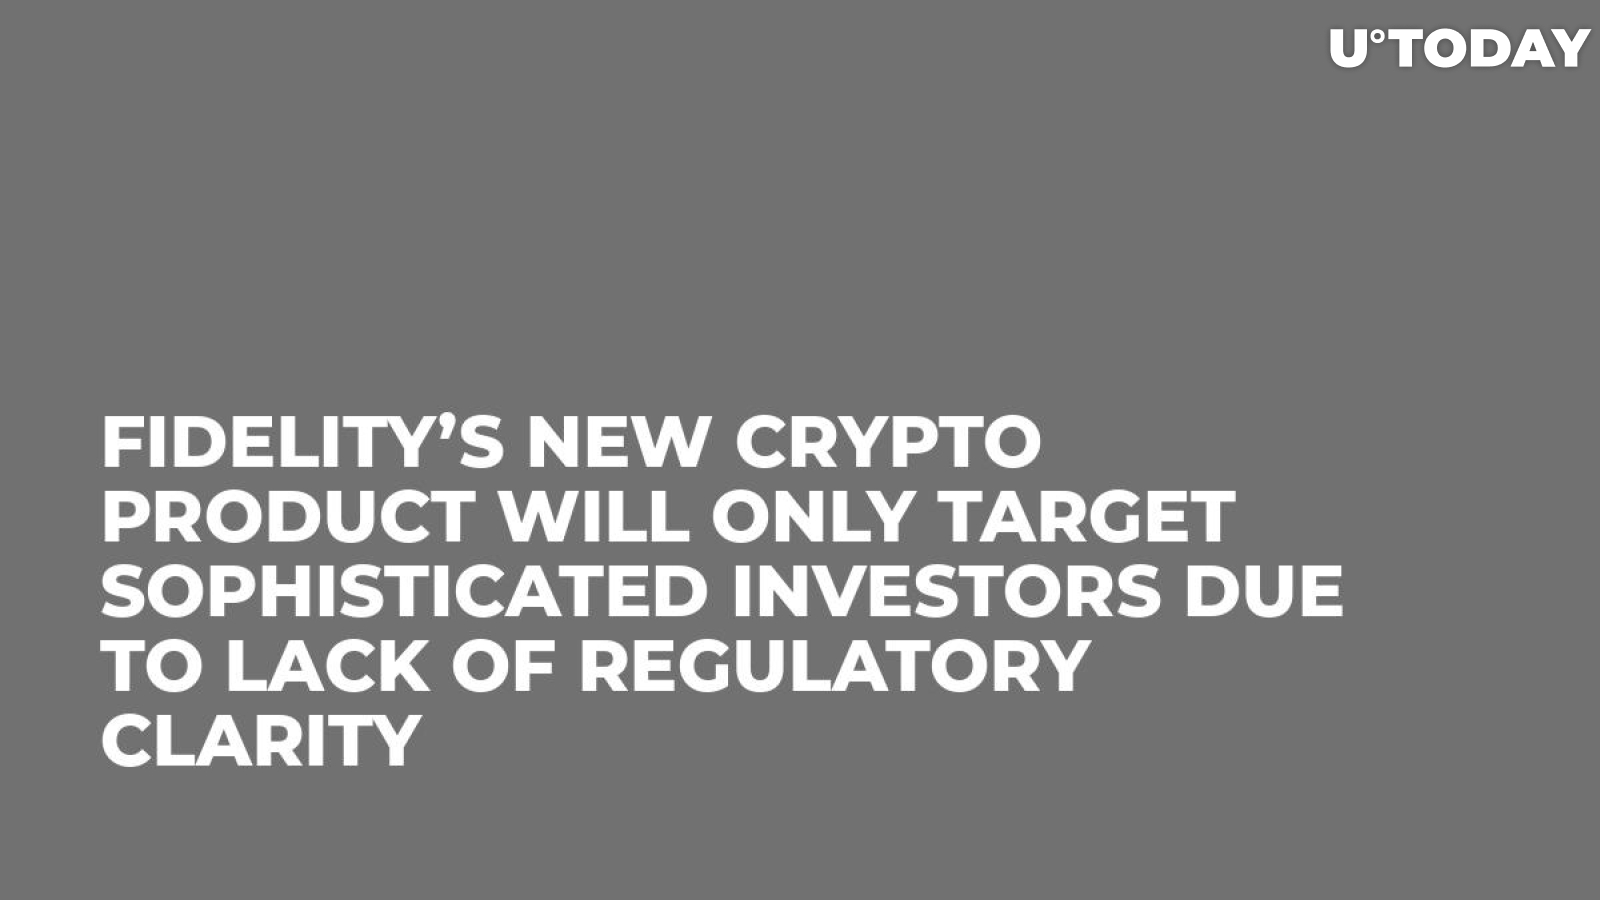 Fidelity’s New Crypto Product Will Only Target Sophisticated Investors Due to Lack of Regulatory Clarity 